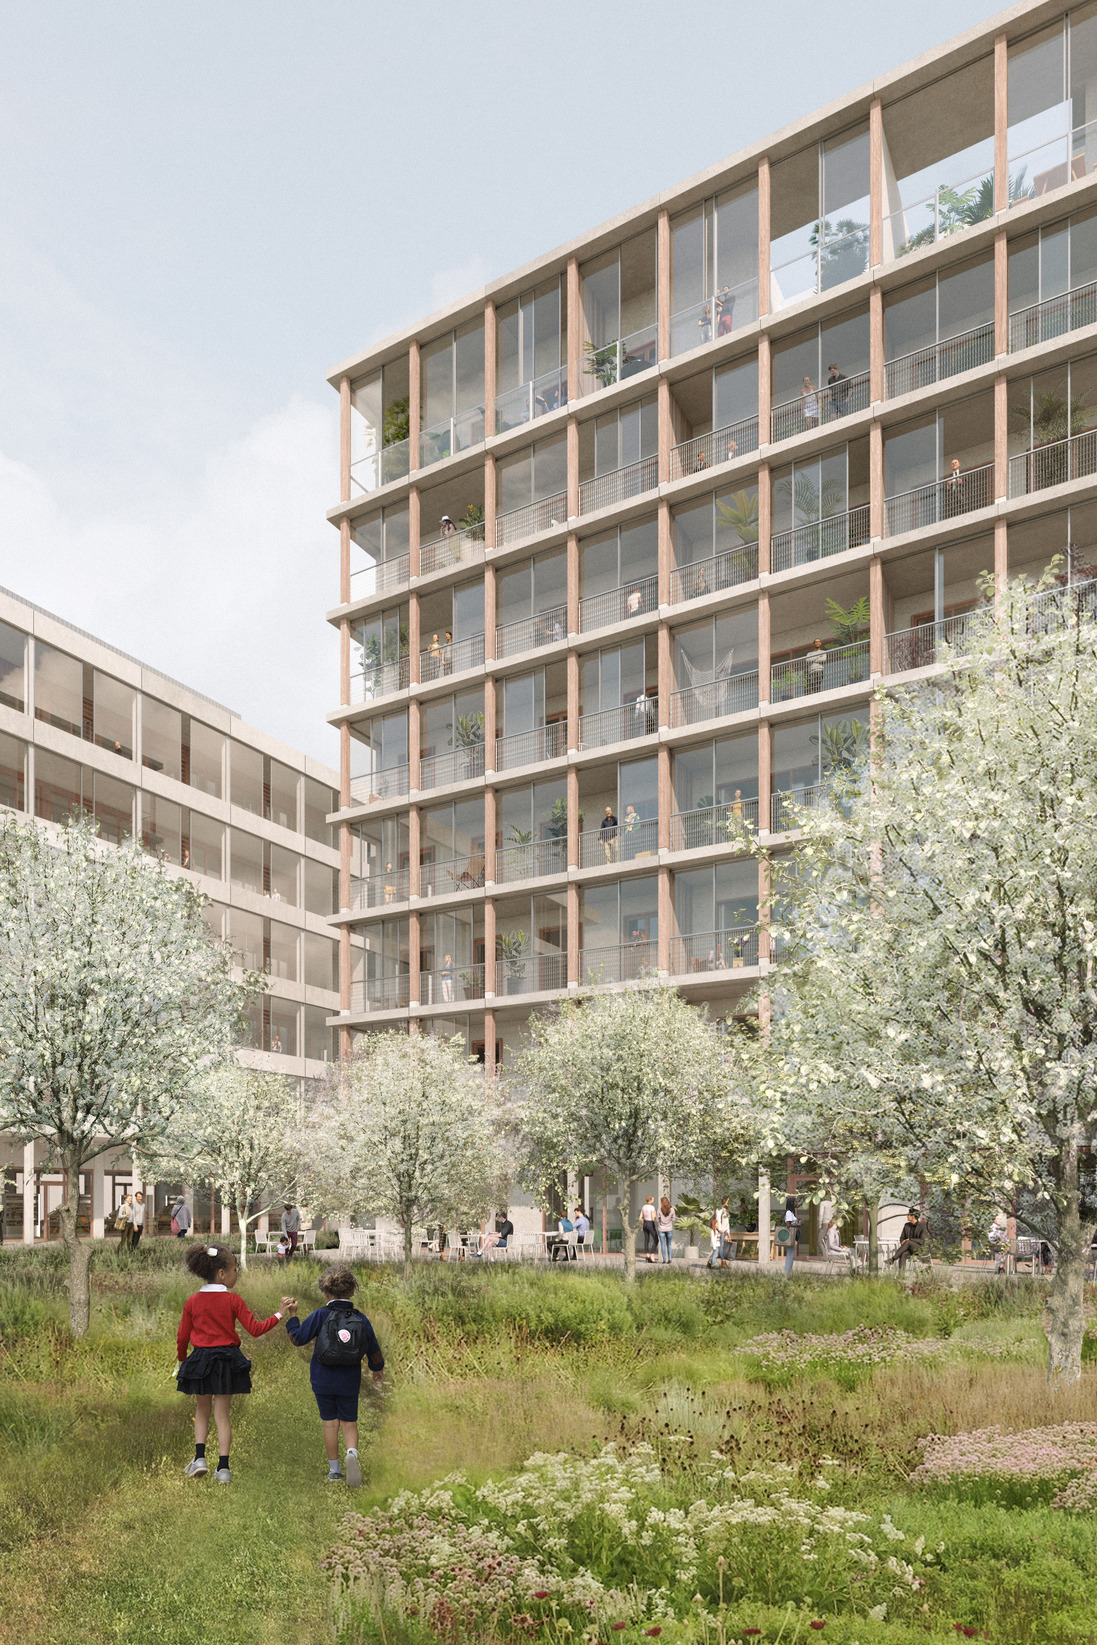 https://davidchipperfield.com/media/Projects/1344-Nieuw-Zuid-residential-and-office-buildings/1344-dca-nieuw-zuid-residential-and-office-buildings-render-02.jpg